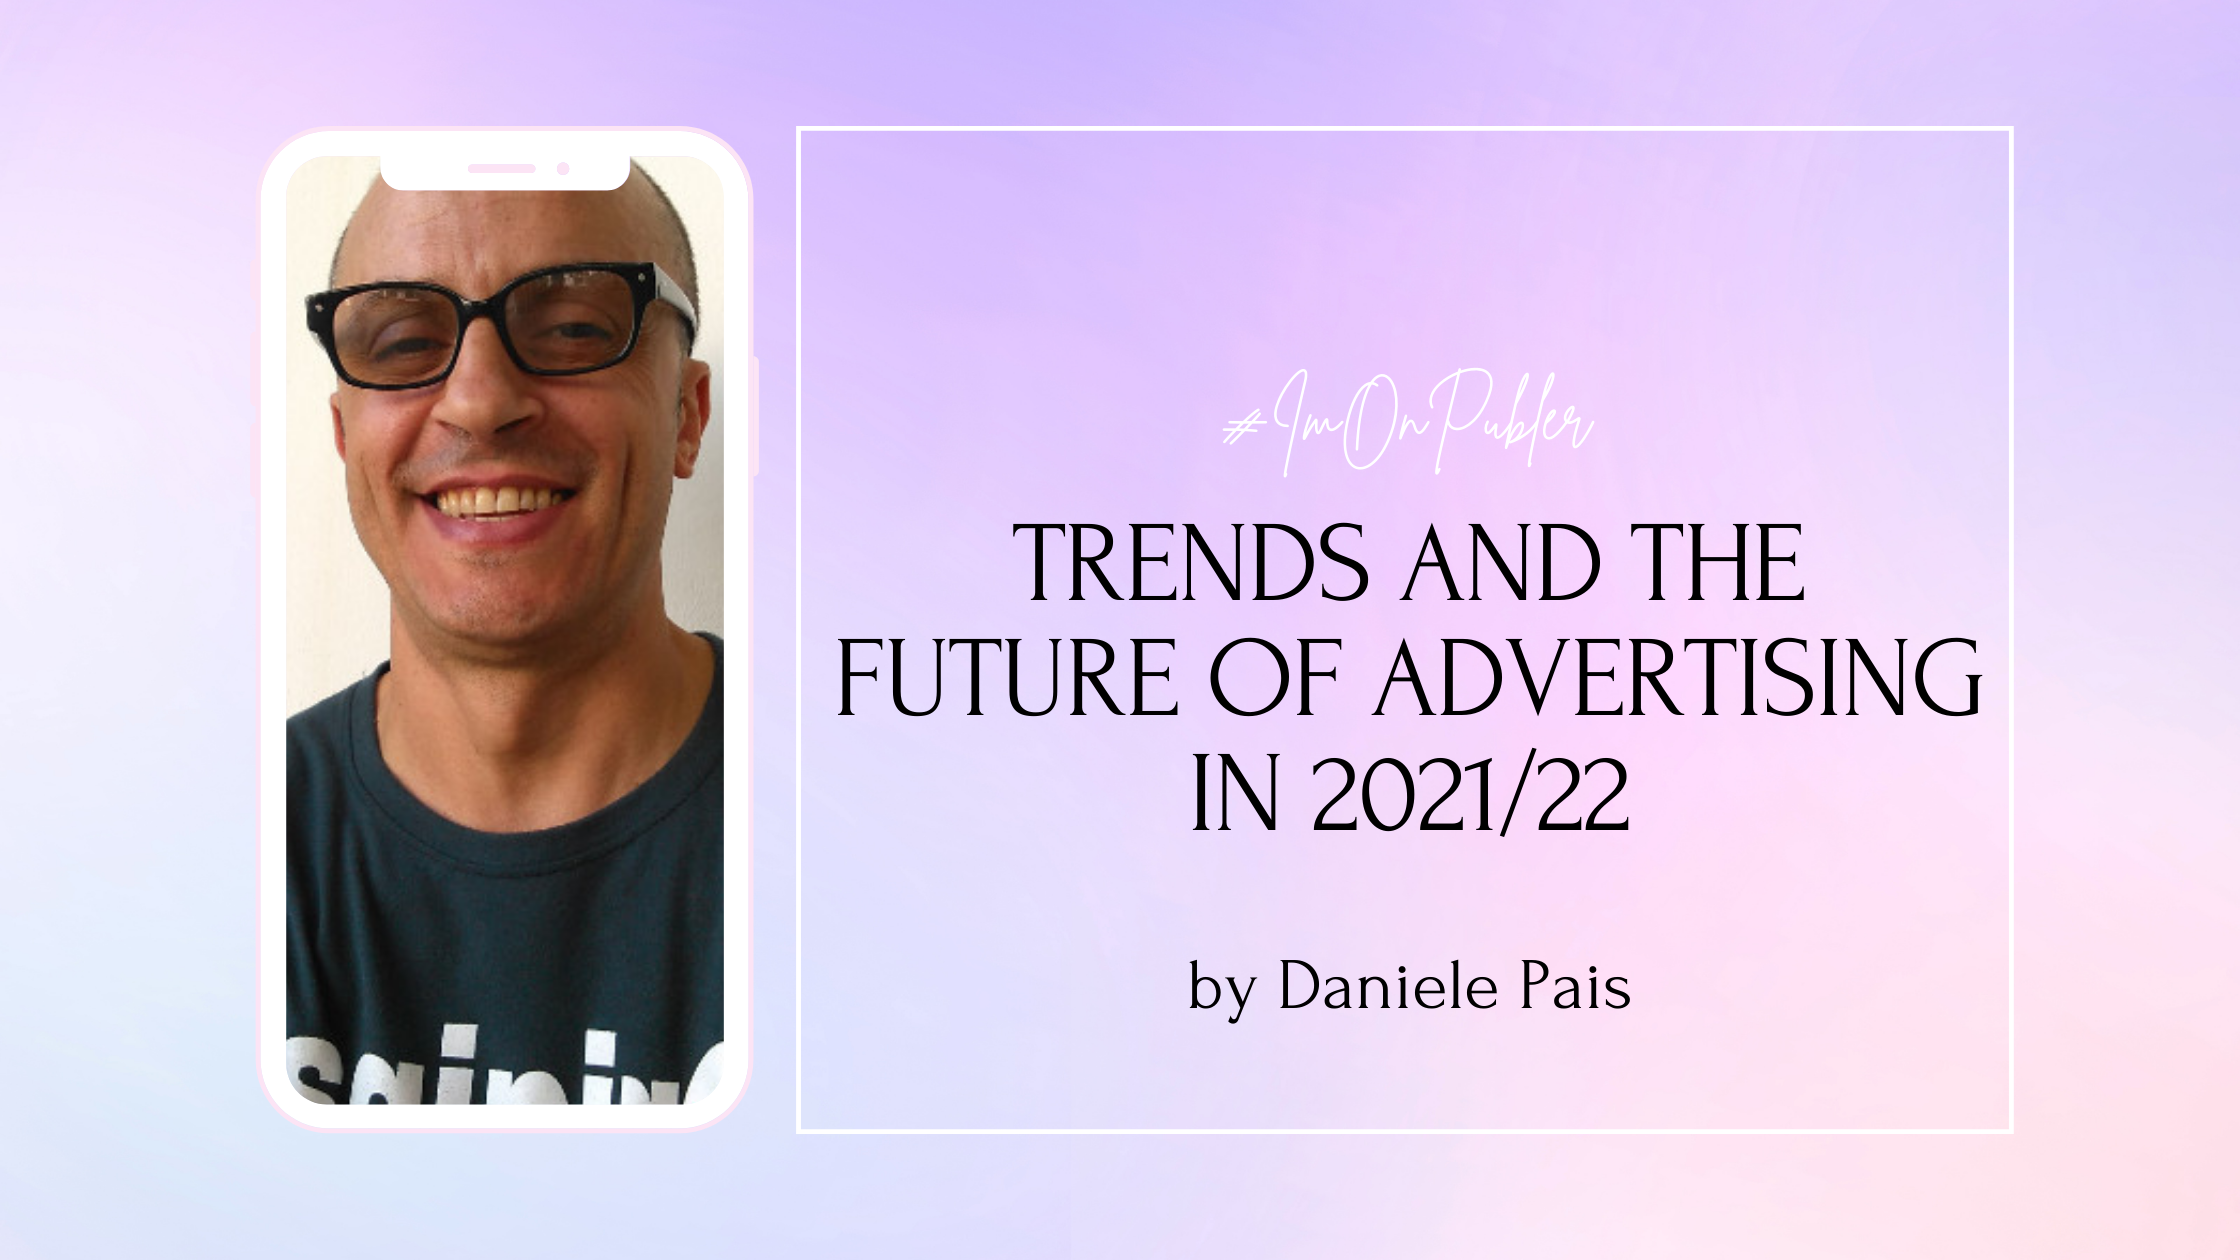 Trends And The Future Of Advertising In 2021/22 by Daniele Pais